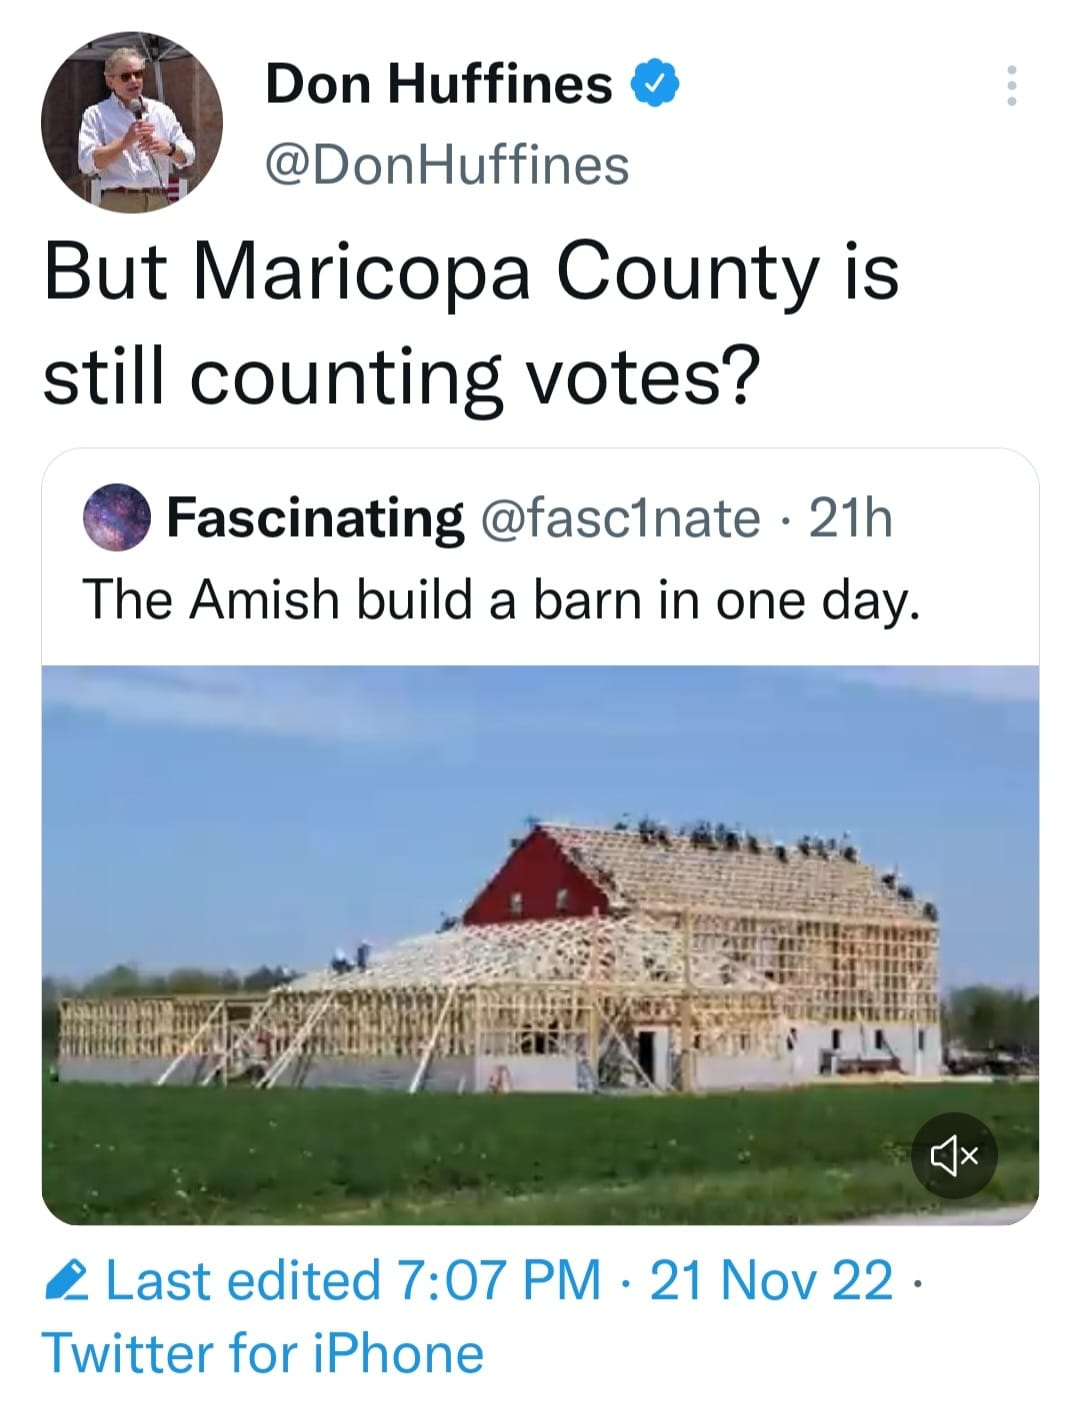 May be an image of 1 person and text that says 'Don Huffines @DonHuffines But Maricopa County is still counting votes? Fascinating @fasc1nate 21h The Amish build a barn in one day. TATORAY 2 Last edited 7:07 PM 21 Nov 22. Twitter for iPhone Phone'